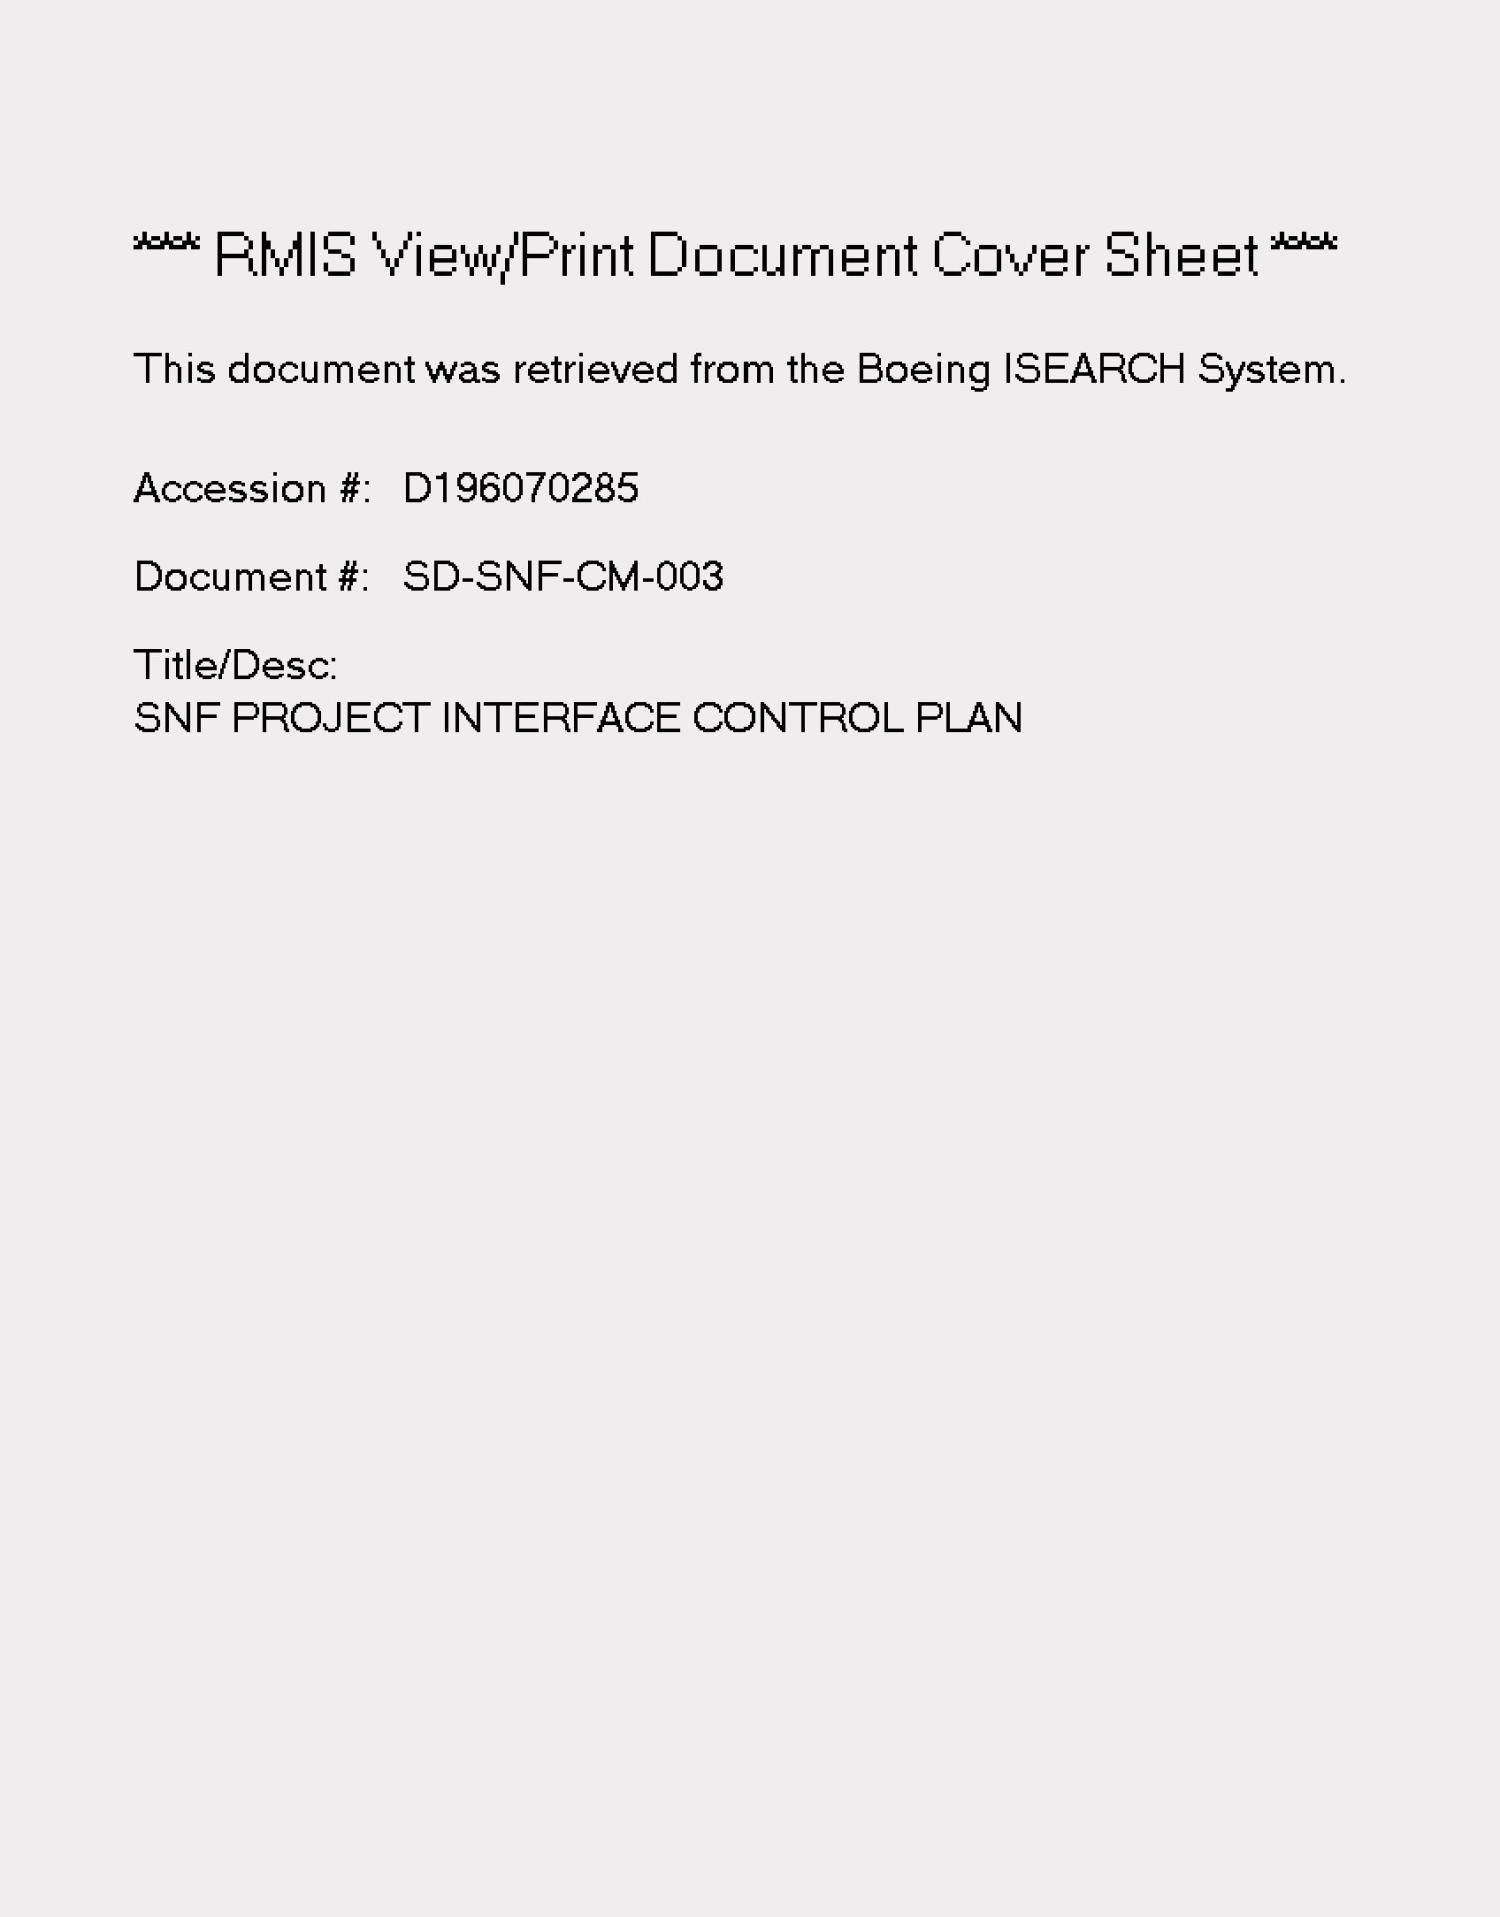 Spent Nuclear Fuel project interface control plan
                                                
                                                    [Sequence #]: 1 of 18
                                                